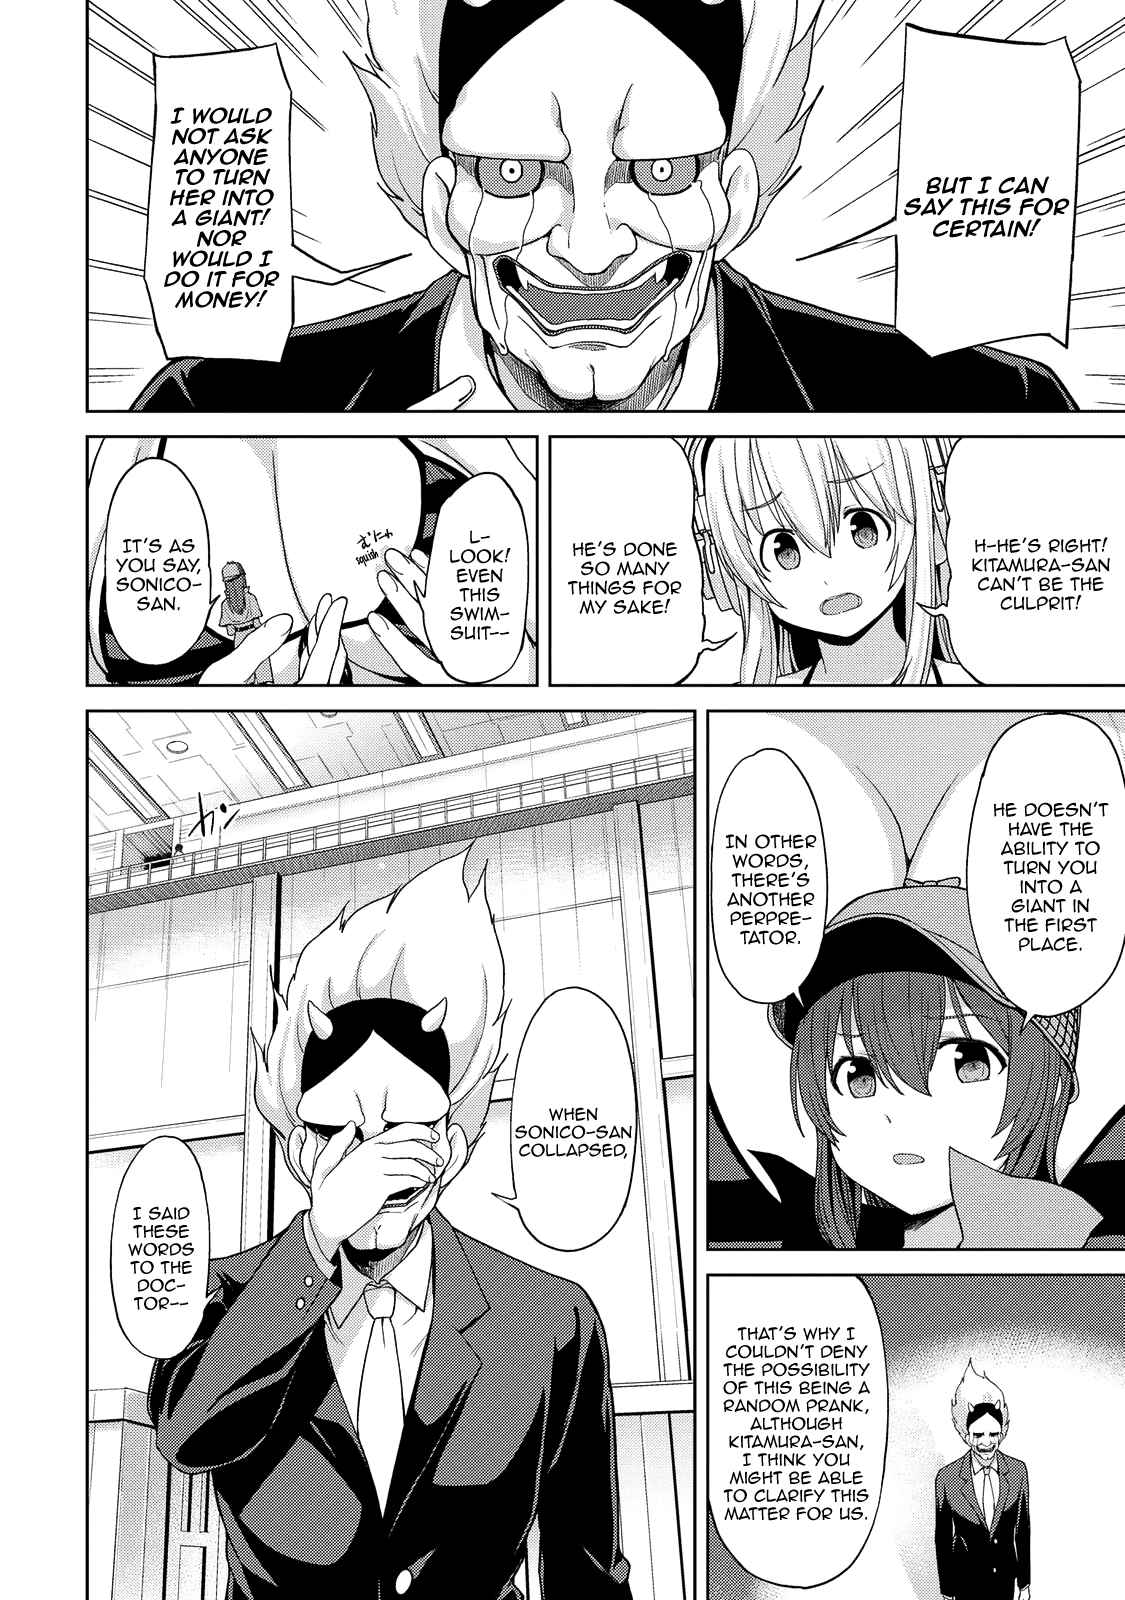 Inconvenient Daily Life of the Super Sonico!!! Vol. 1 Ch. 5 Dominic and the Boy